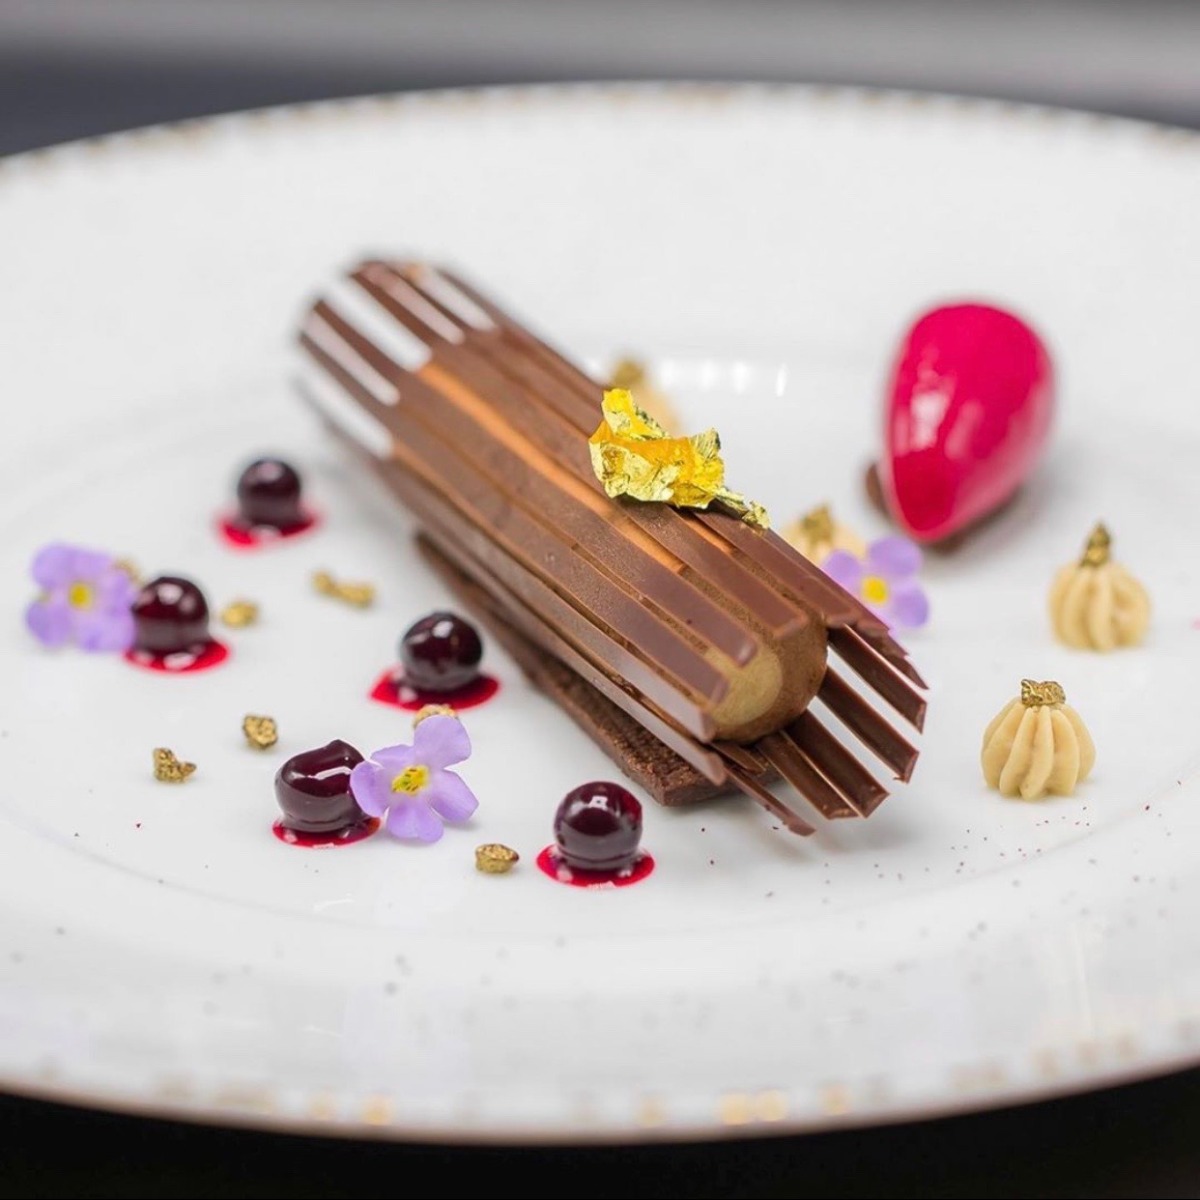 PLATED DESSERTS BY GHAYA F. OLIVEIRA